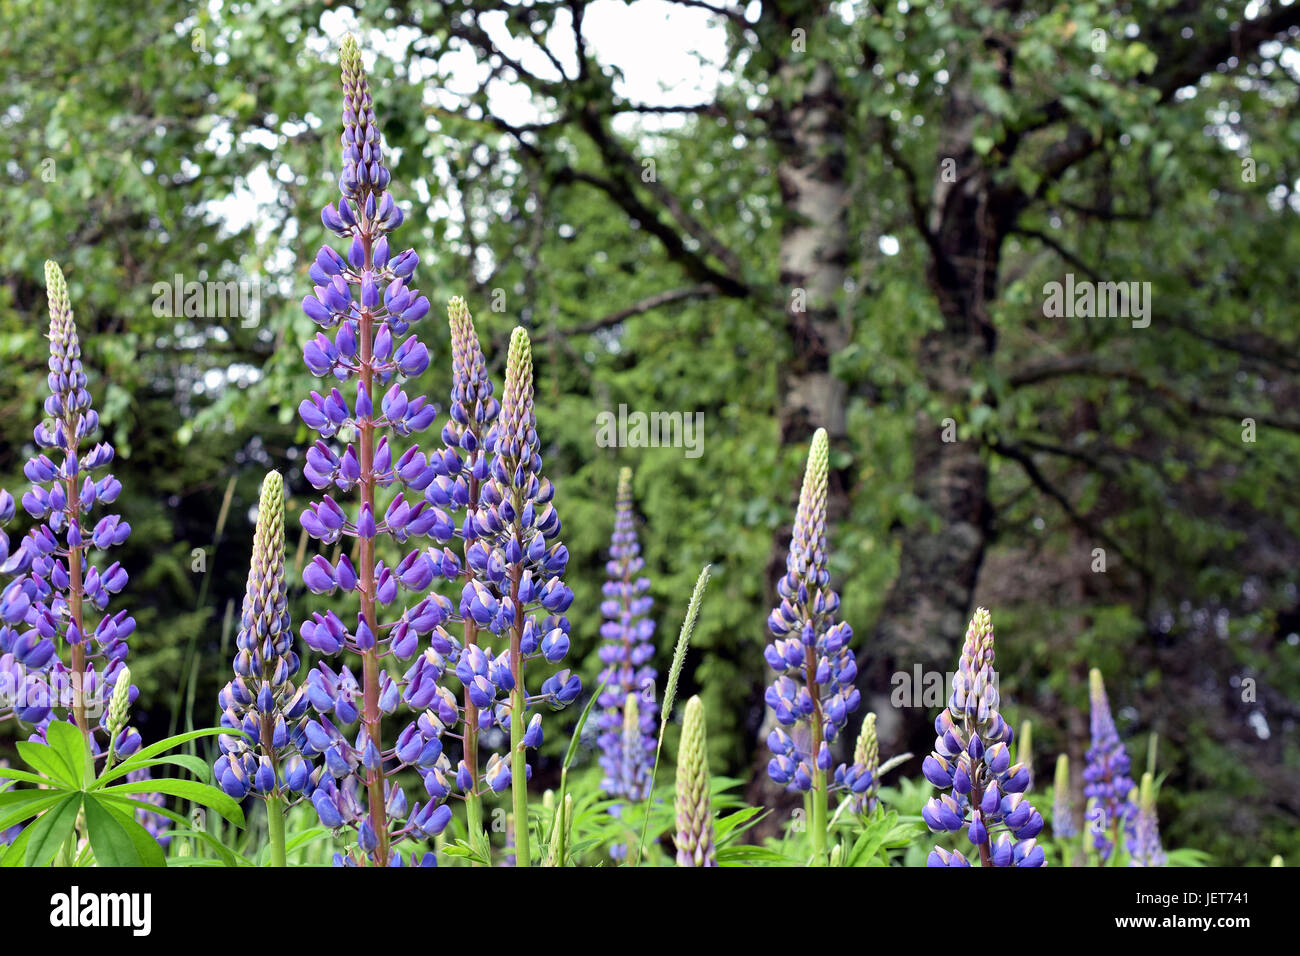 Flowering lupins, Lupinus polyphyllus, also know as large-leaved or big-leaved lupine. Stock Photo